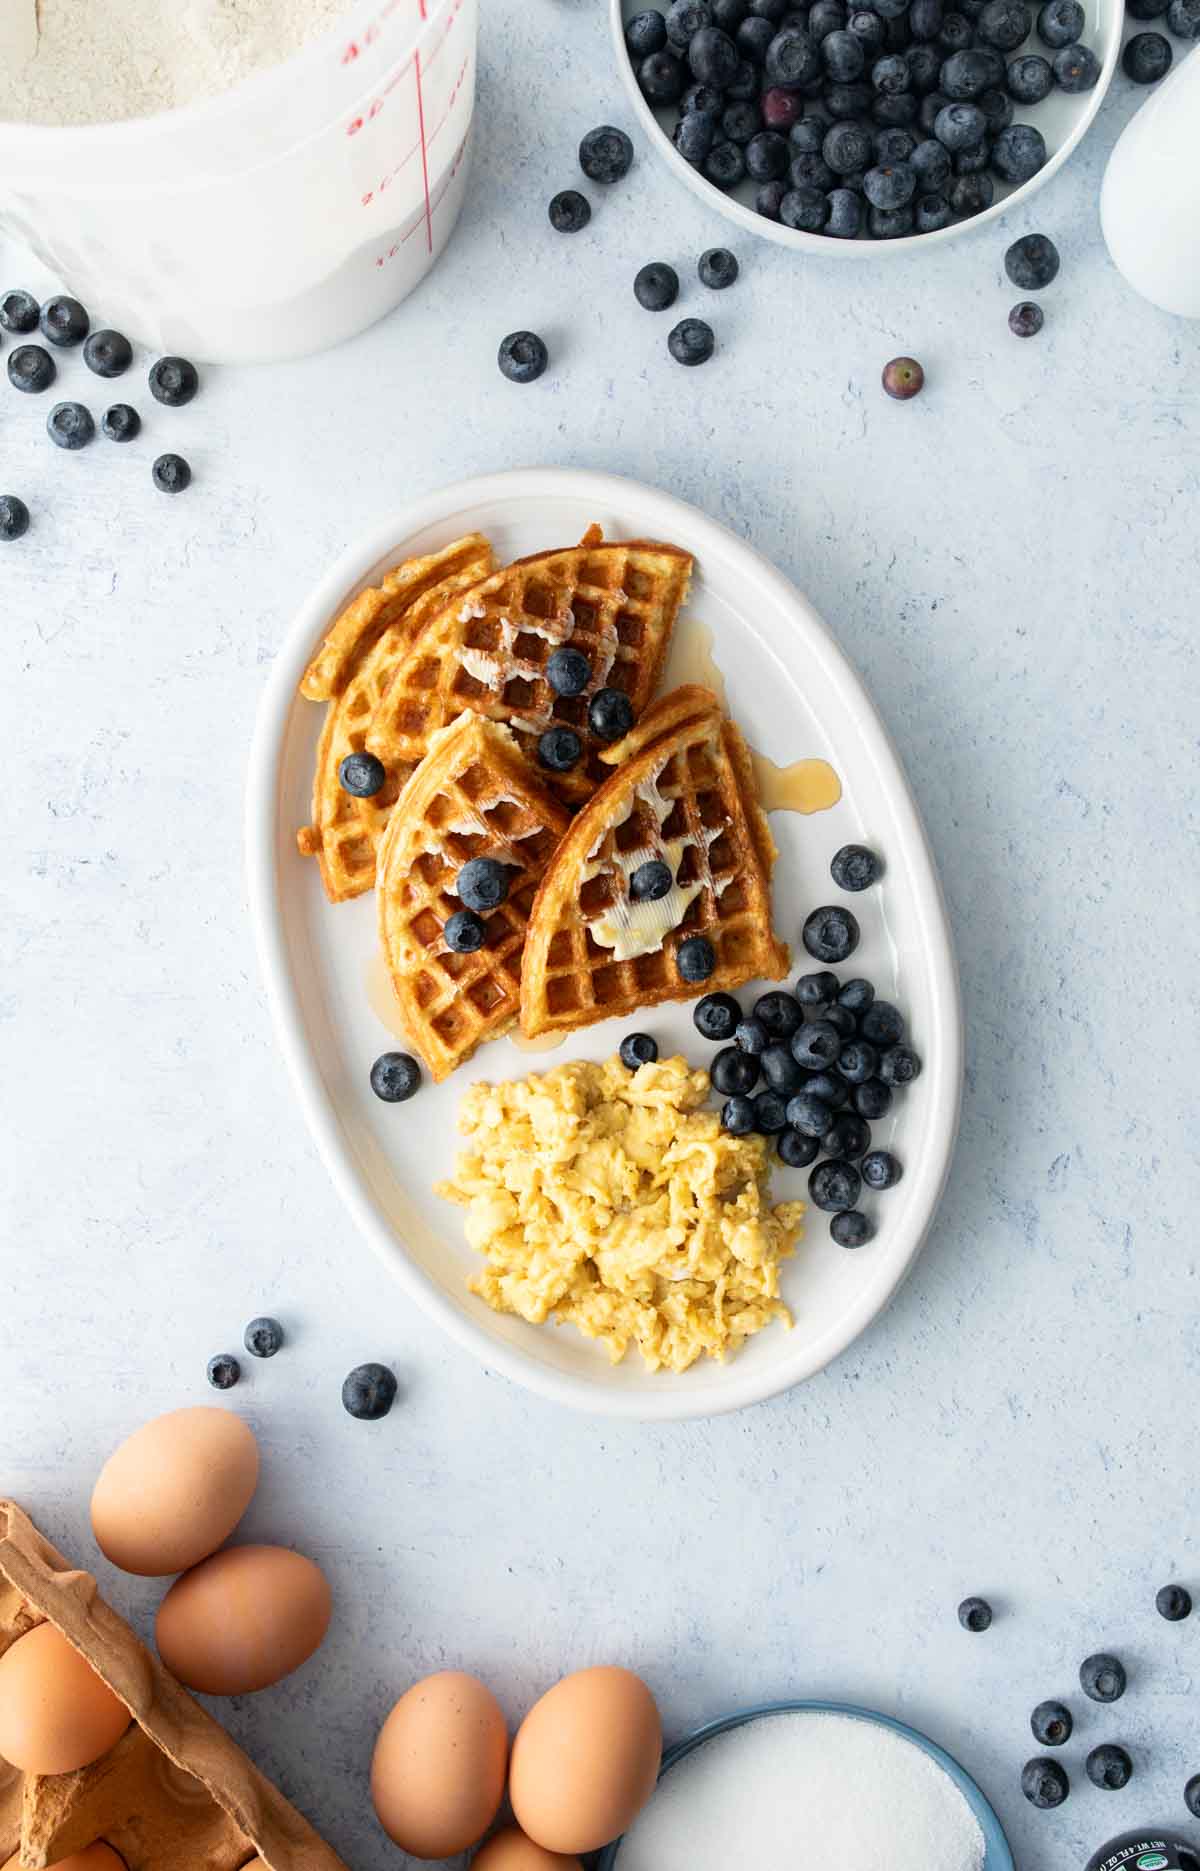 quartered waffle, scrambled eggs, and blueberries on oval plate